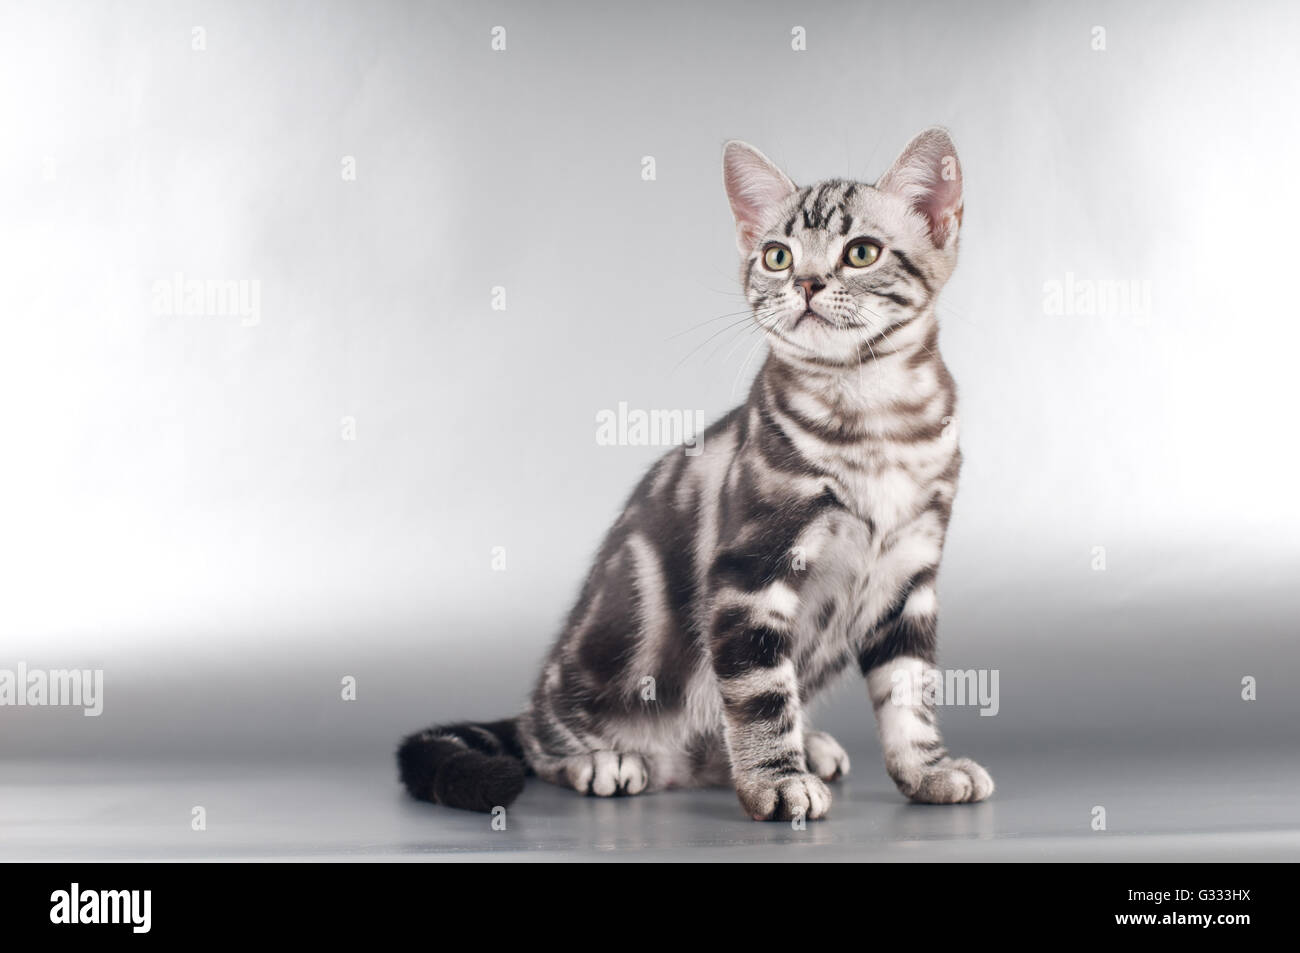 American shorthaired kittens on silver background Stock Photo